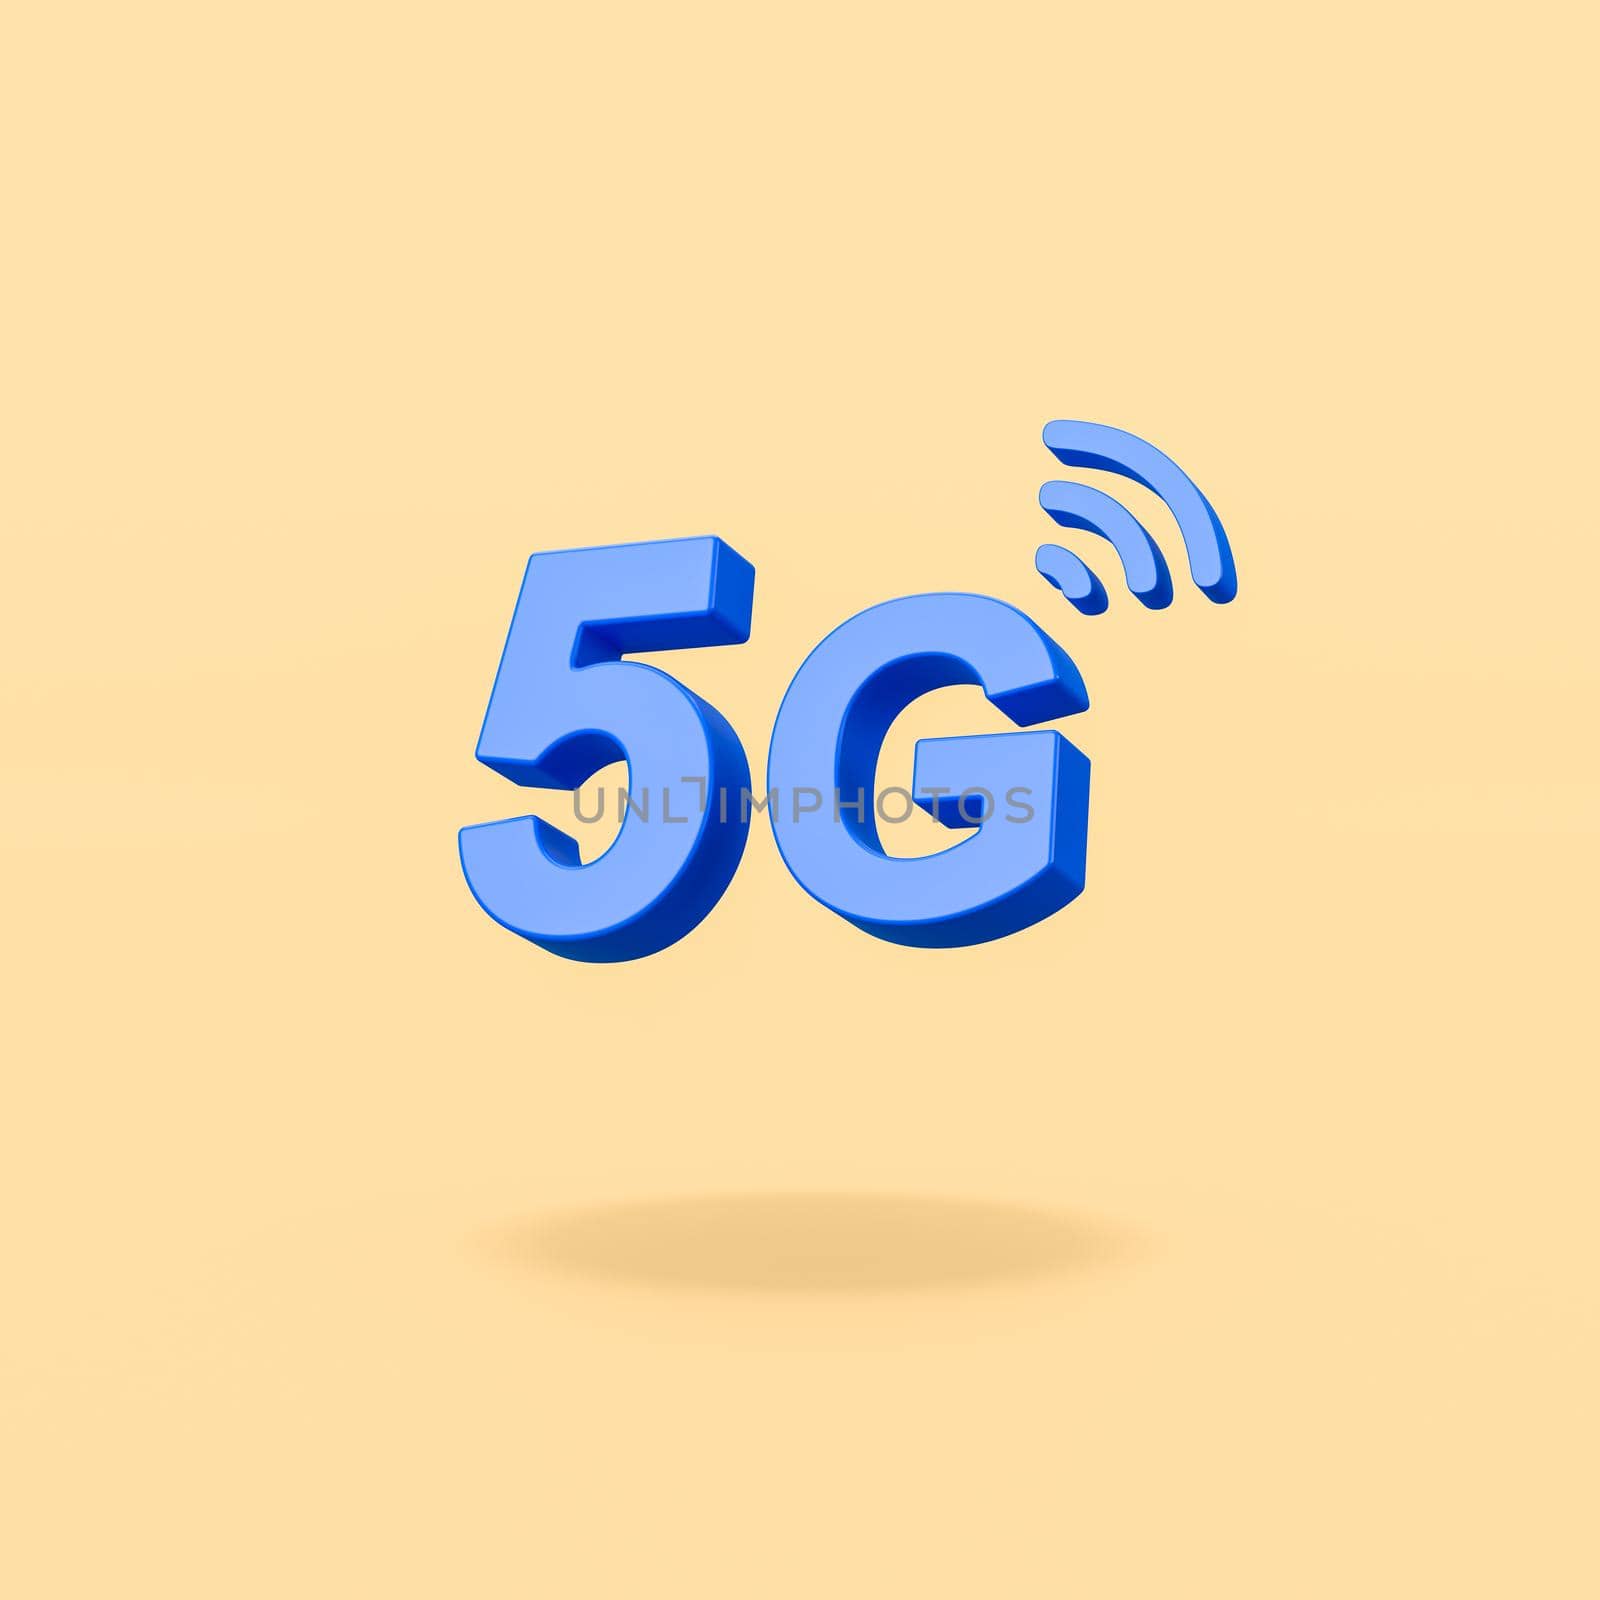 Blue 5G 3D Text Symbol Shape on Flat Yellow Background with Shadow 3D Illustration